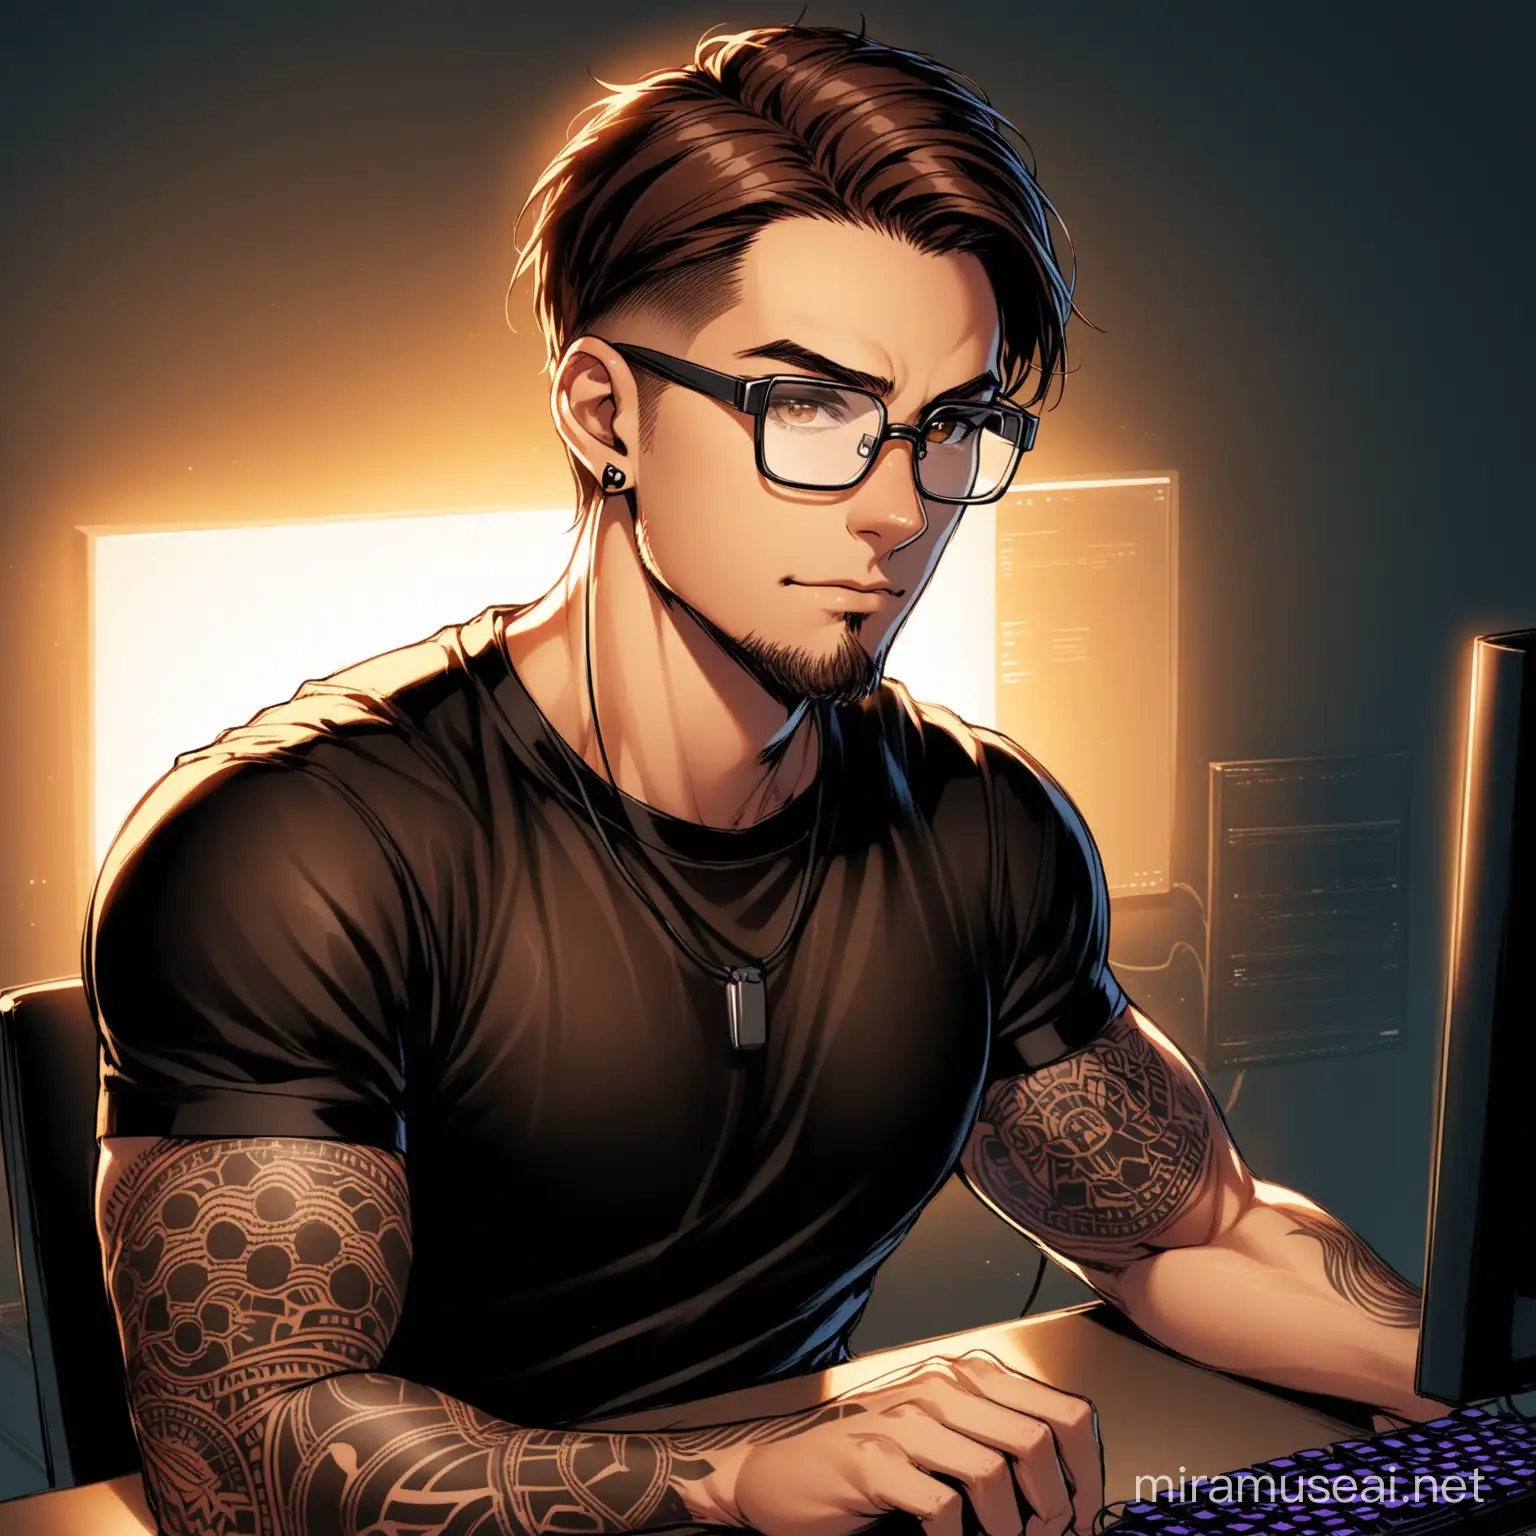 a nerdy mid 30s guy, square glasses, very short cropped brown hair, brown eyes, black mesh t shirt, toned, tattoos, rim lighting, sitting at a computer, gauge ears